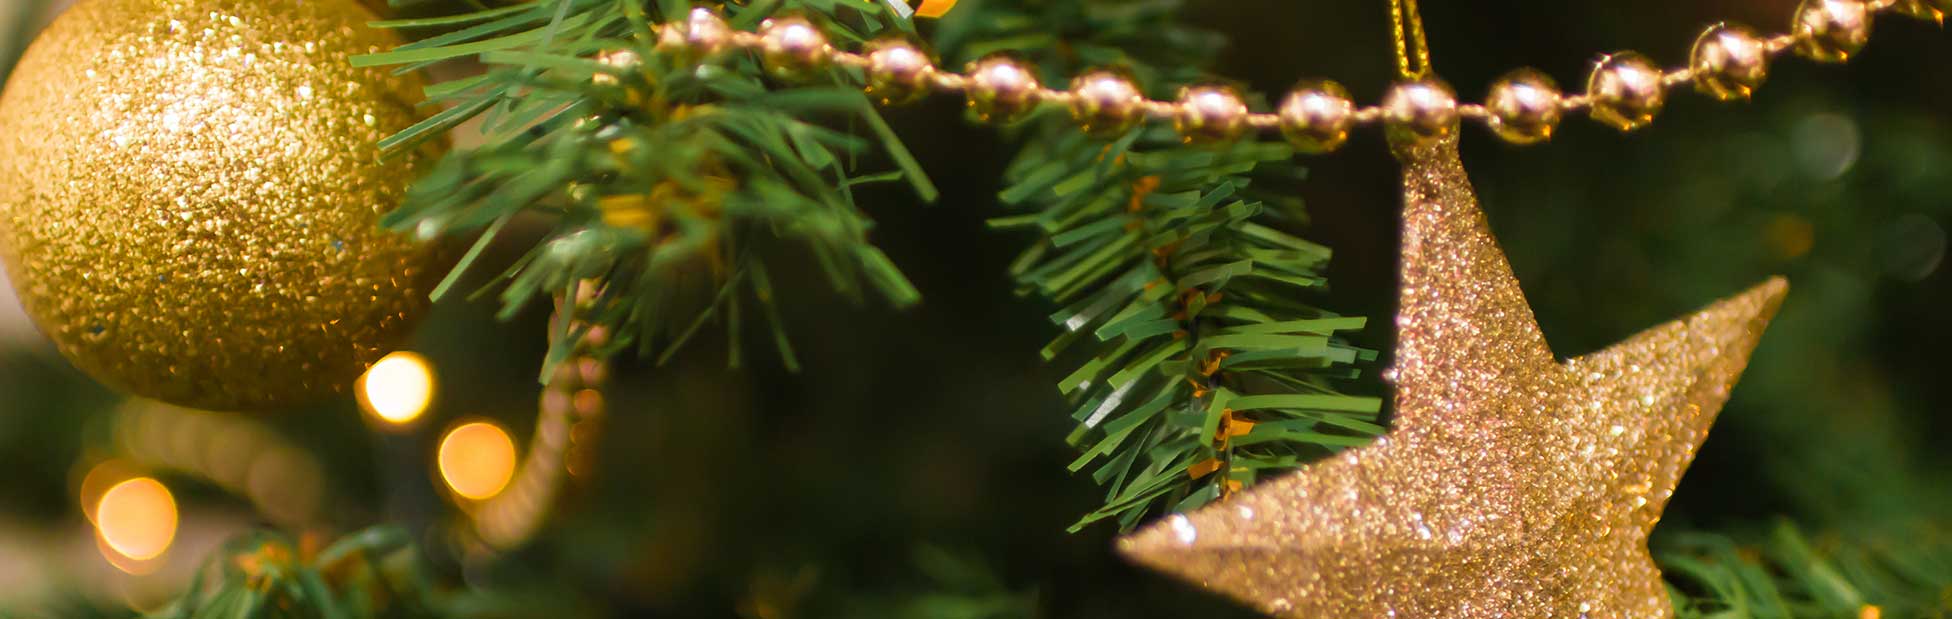 Gold Christmas Decorations on tree